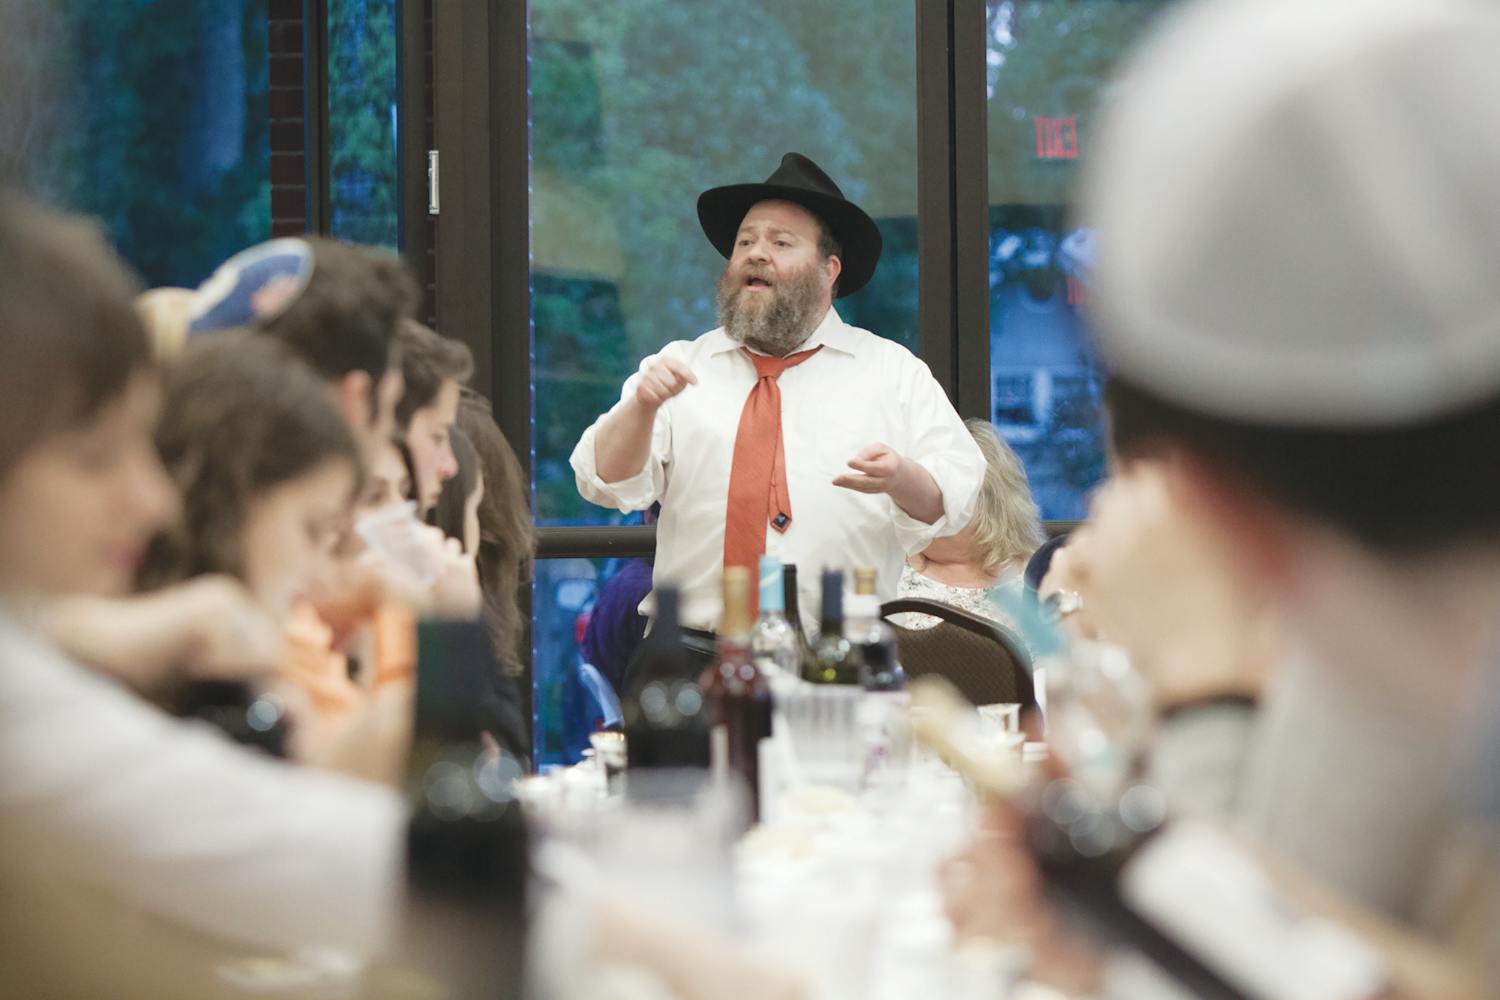 Rabbi Berl Goldman, a director of the Lubavitch Chabad Jewish Center, speaks to about 600 people before officially starting Passover at about 8 p.m. on Monday. 